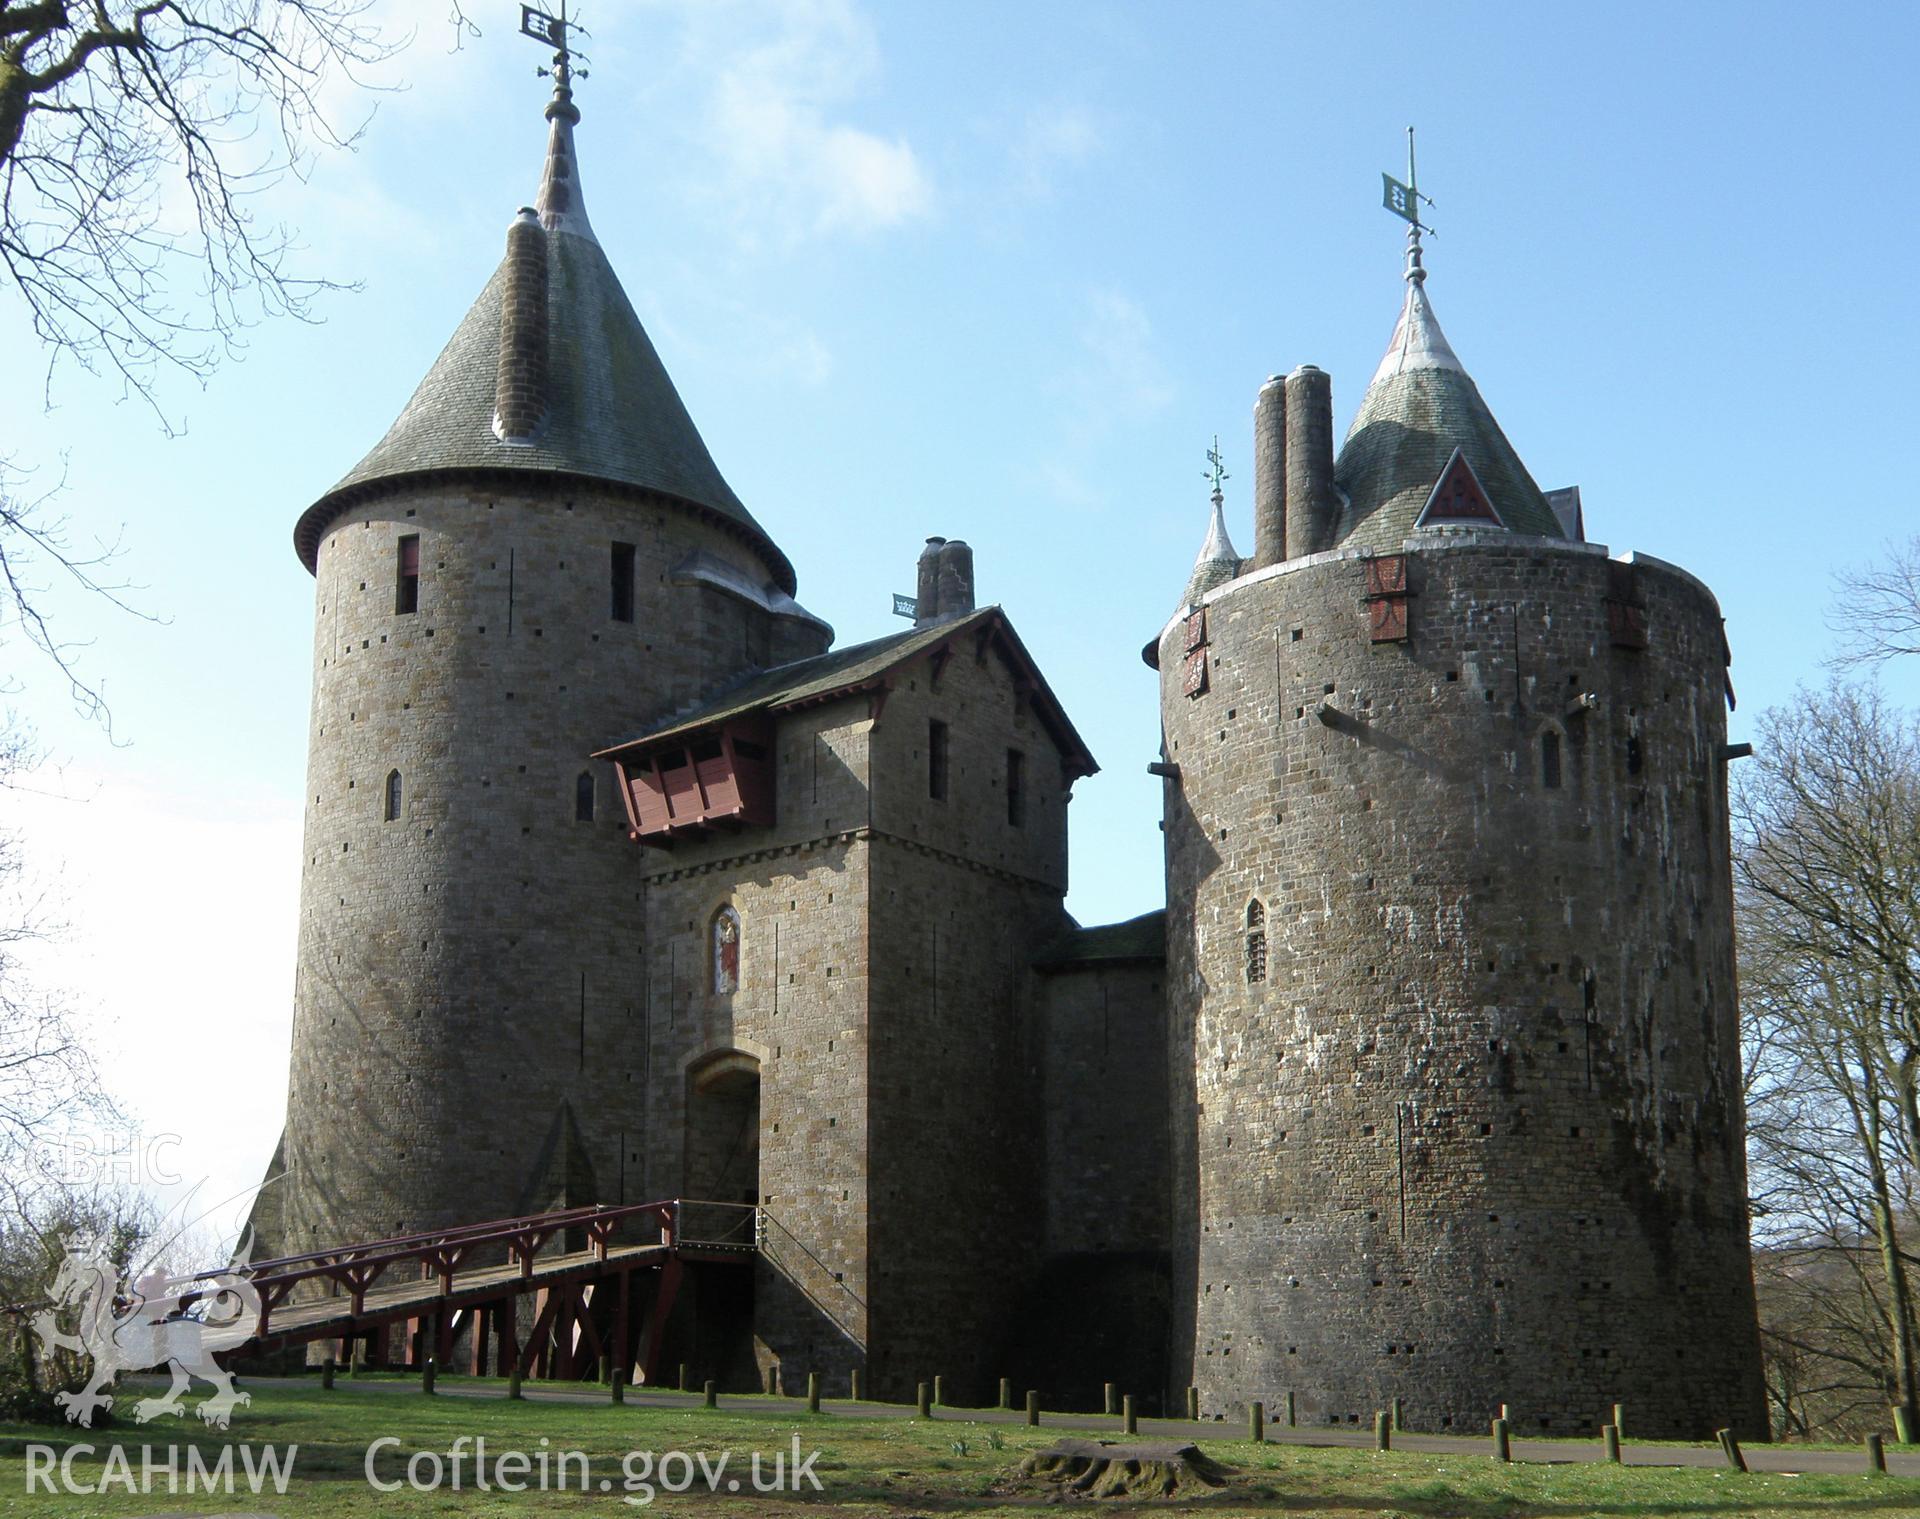 Colour photo of Castell Coch, taken by Paul R. Davis, 10th March 2012.